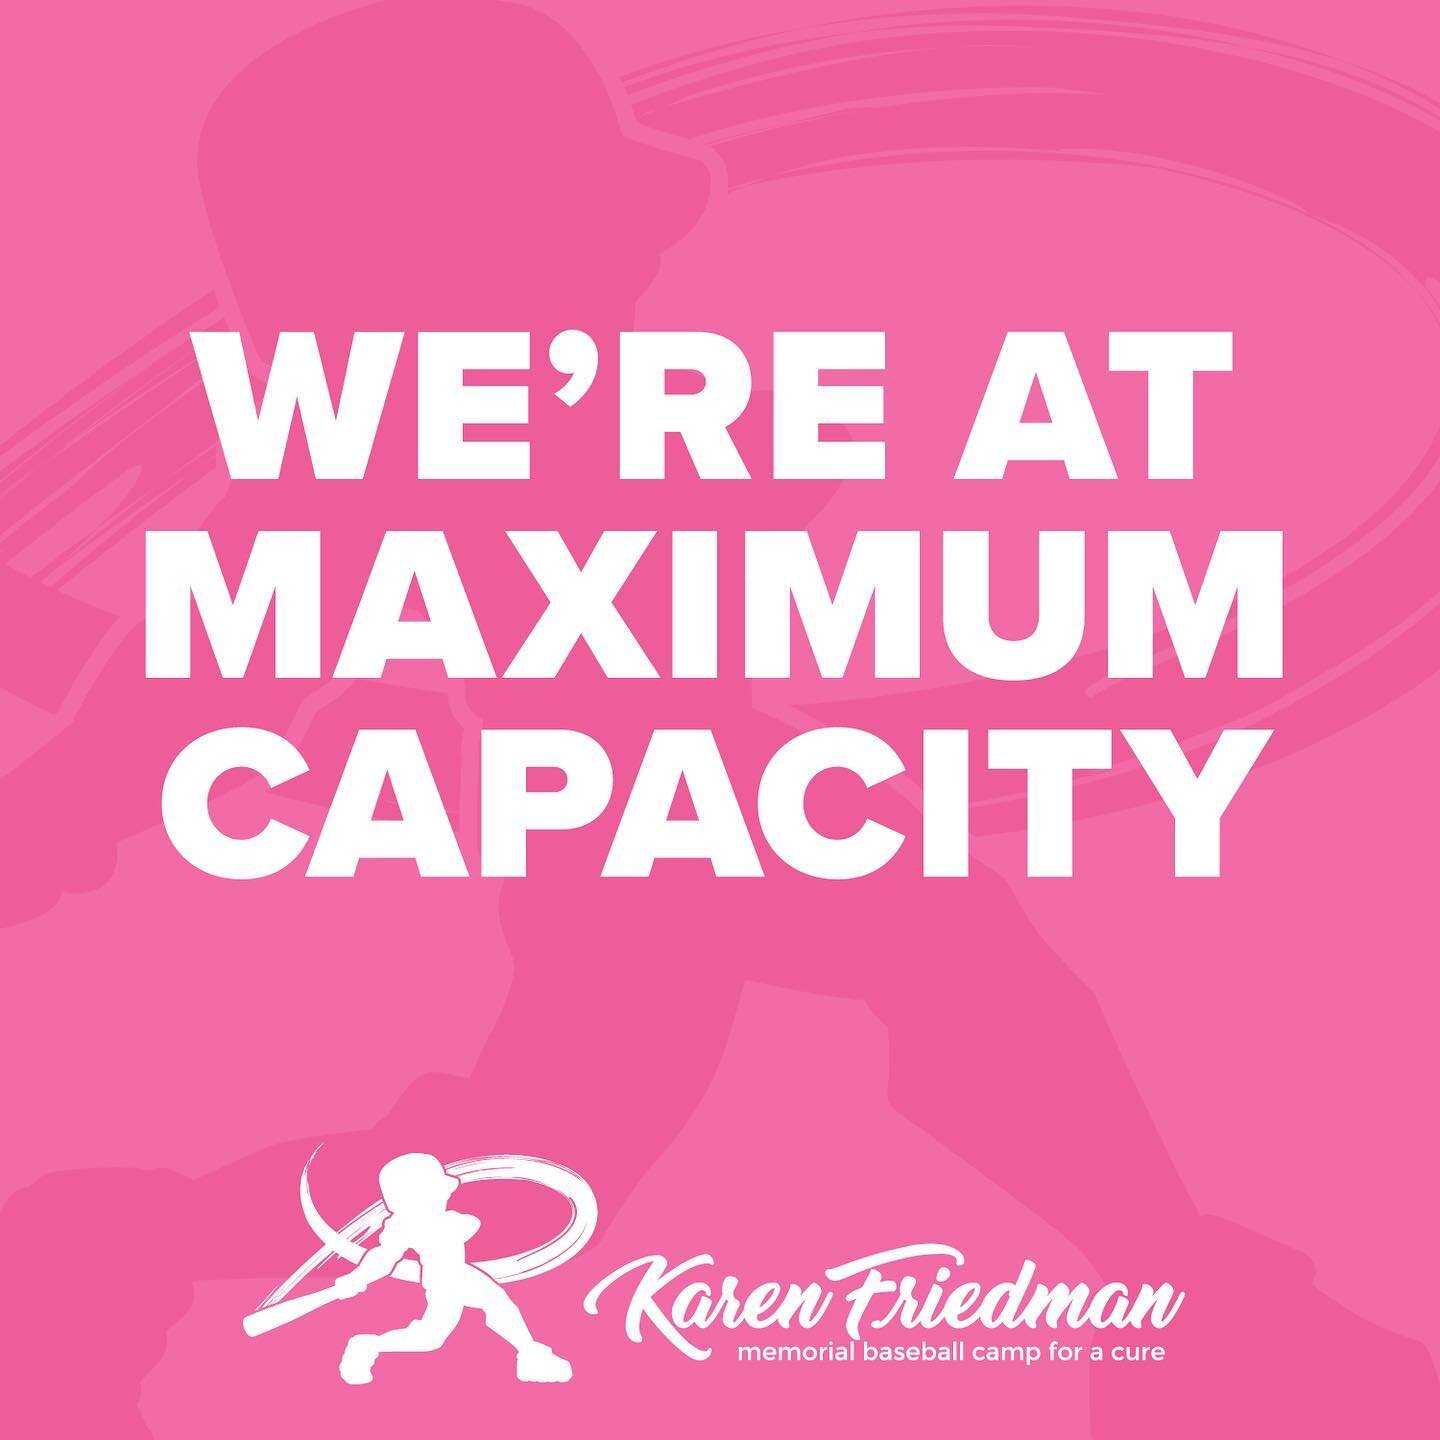 This is a bittersweet announcement but we are extremely overwhelmed with the interest in camp this year! For the first time since we started the Karen Friedman Baseball Camp for a Cure, we have reached maximum capacity! It&rsquo;s an honor to see the